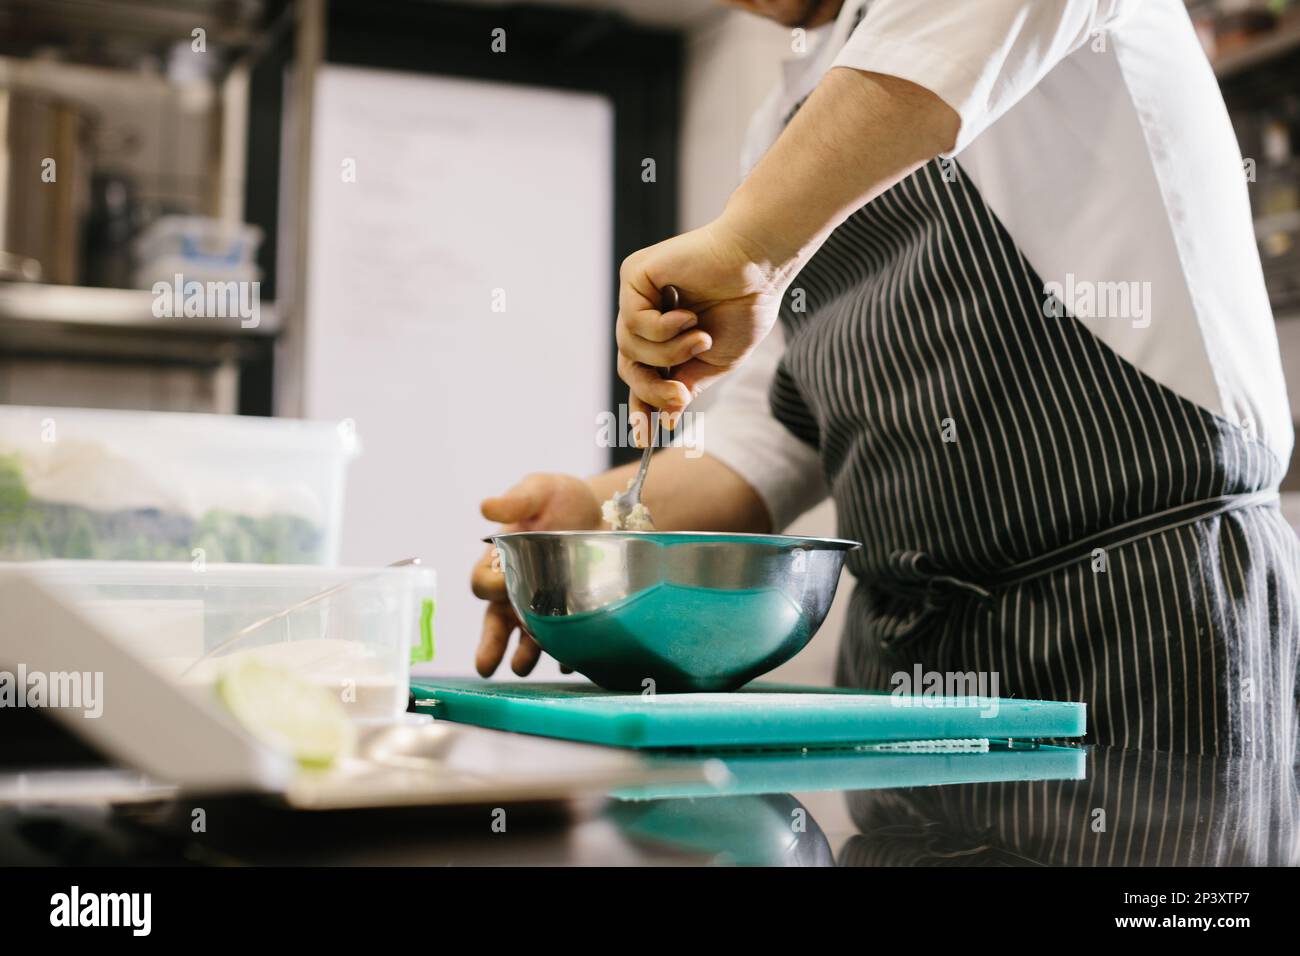 Close up. A male cook prepares pancake batter in a metal bowl in the kitchen of a restaurant. Stock Photo